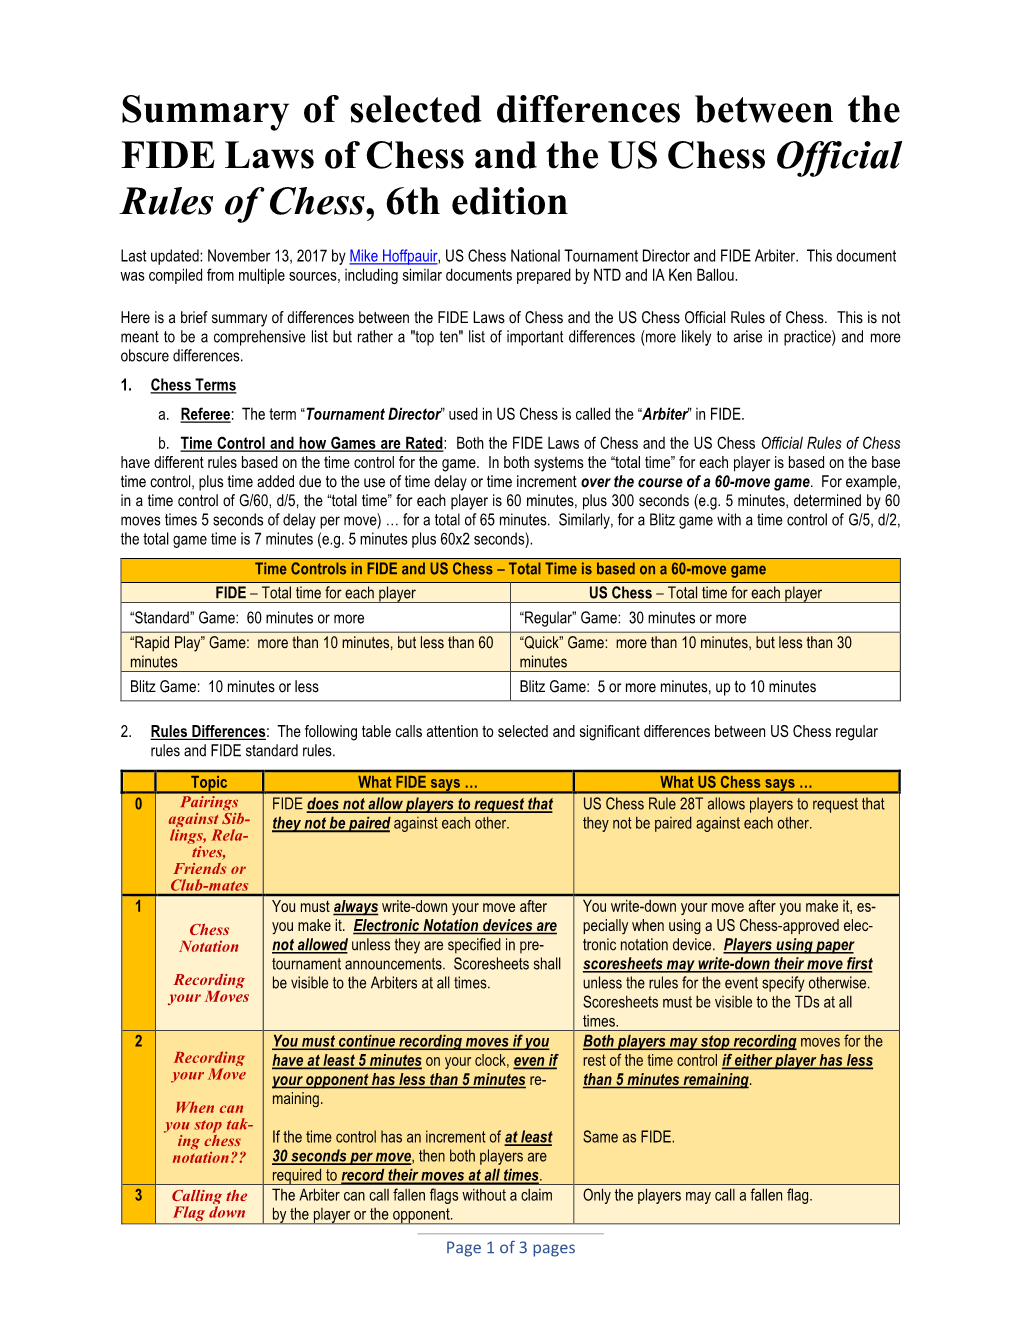 Summary of Selected Differences Between the FIDE Laws of Chess and the US Chess Official Rules of Chess, 6Th Edition